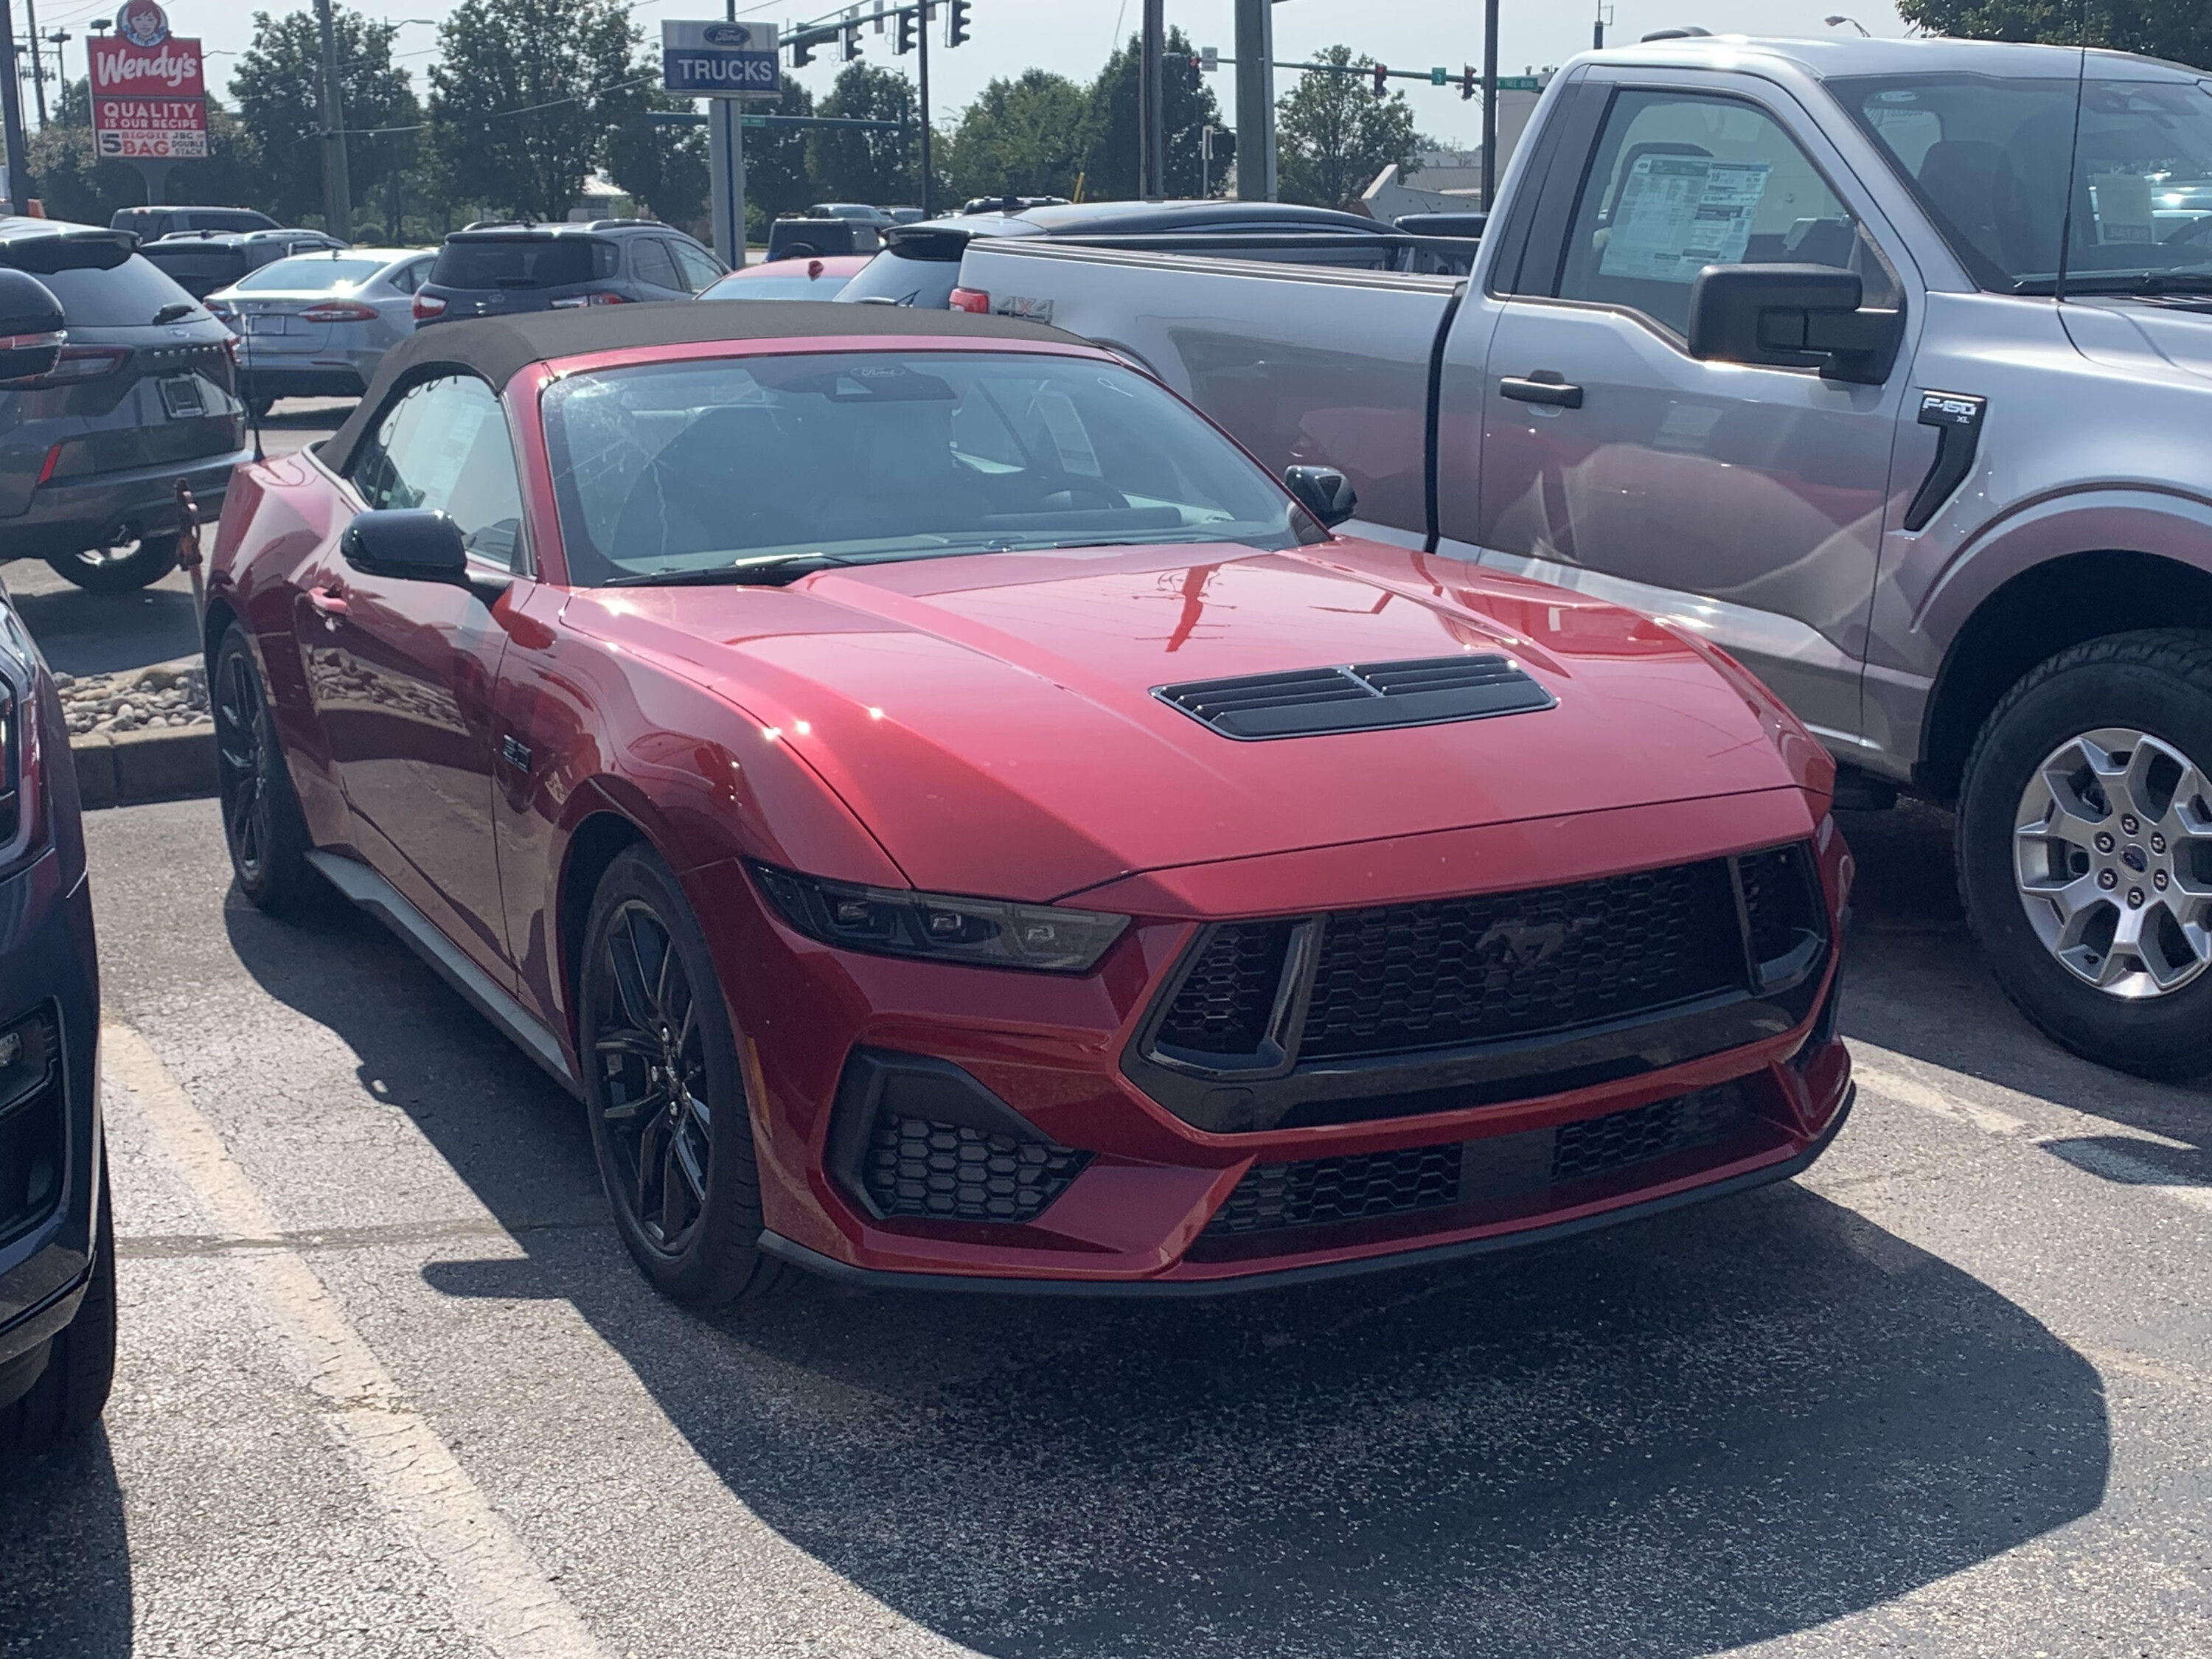 S650 Mustang BUILT & SHIPPED !! Tracker update 2023: What's your status? car3